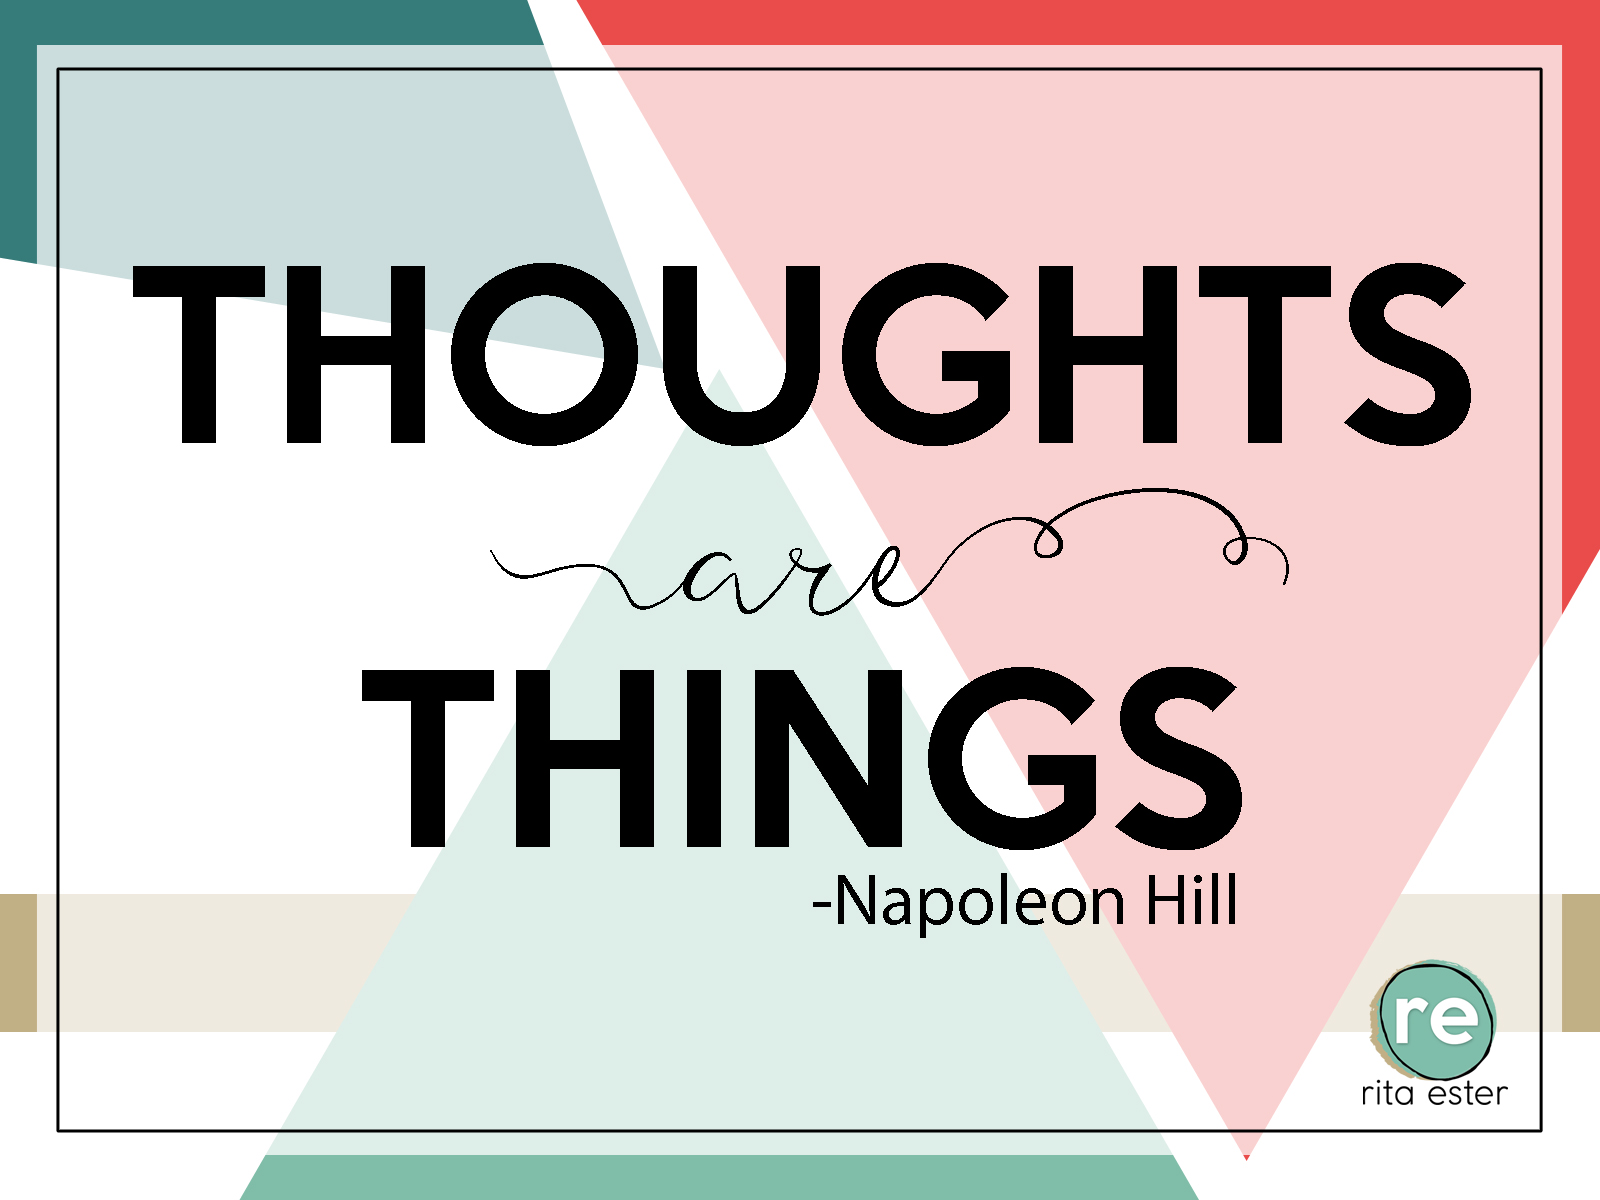 Thoughts are Things – How I changed my life by changing my thoughts